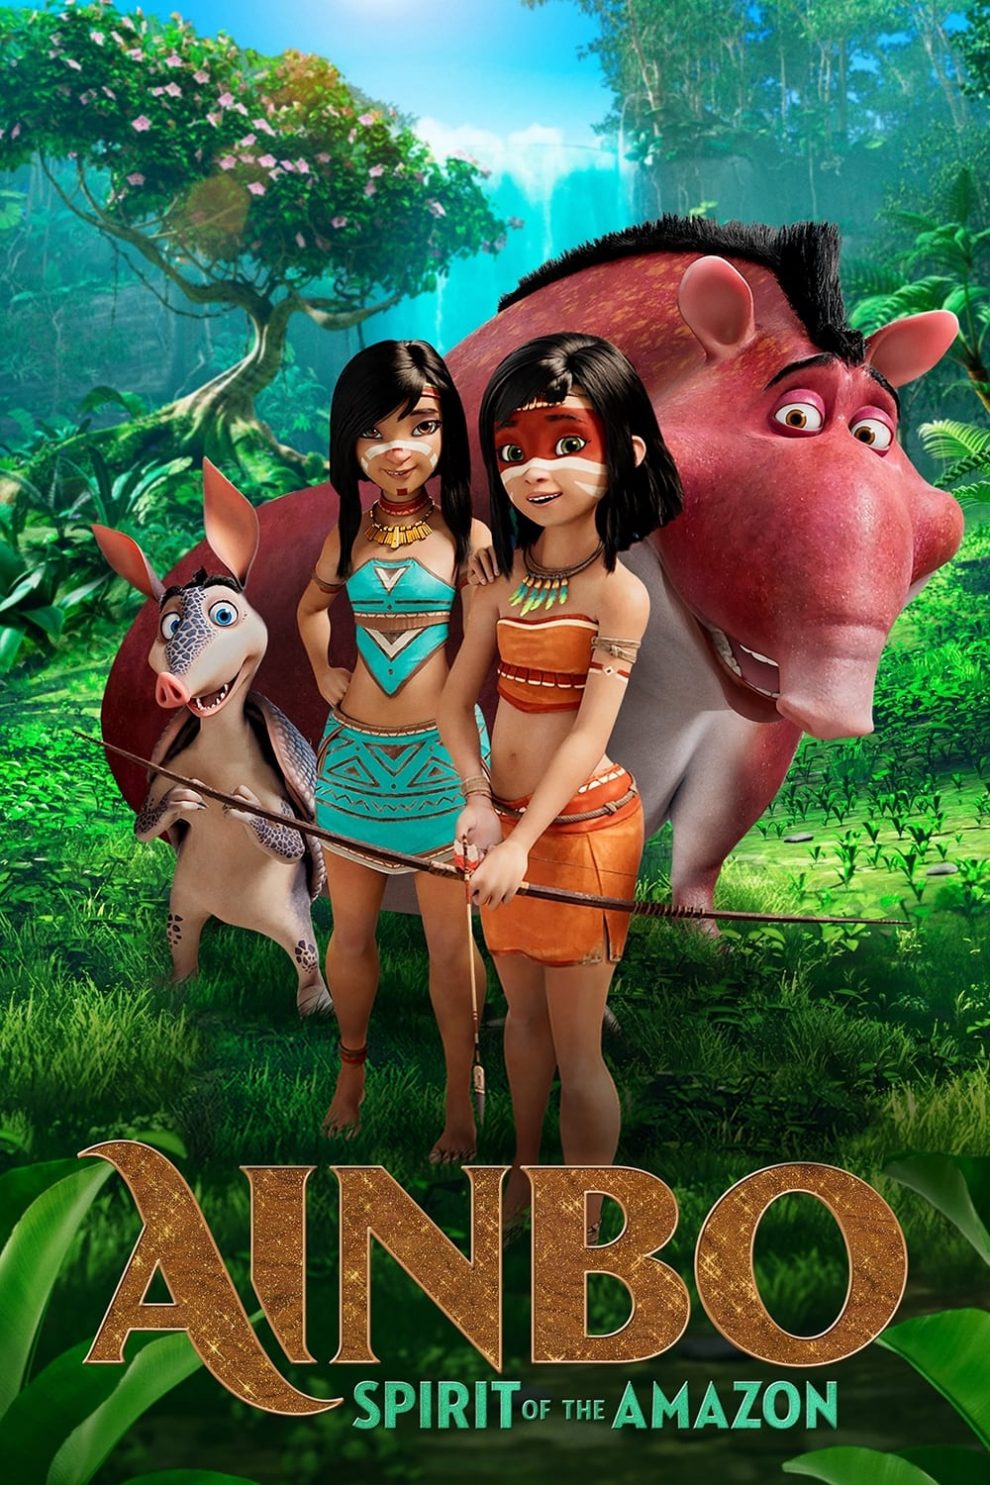 Poster for the movie "Ainbo: Spirit of the Amazon"